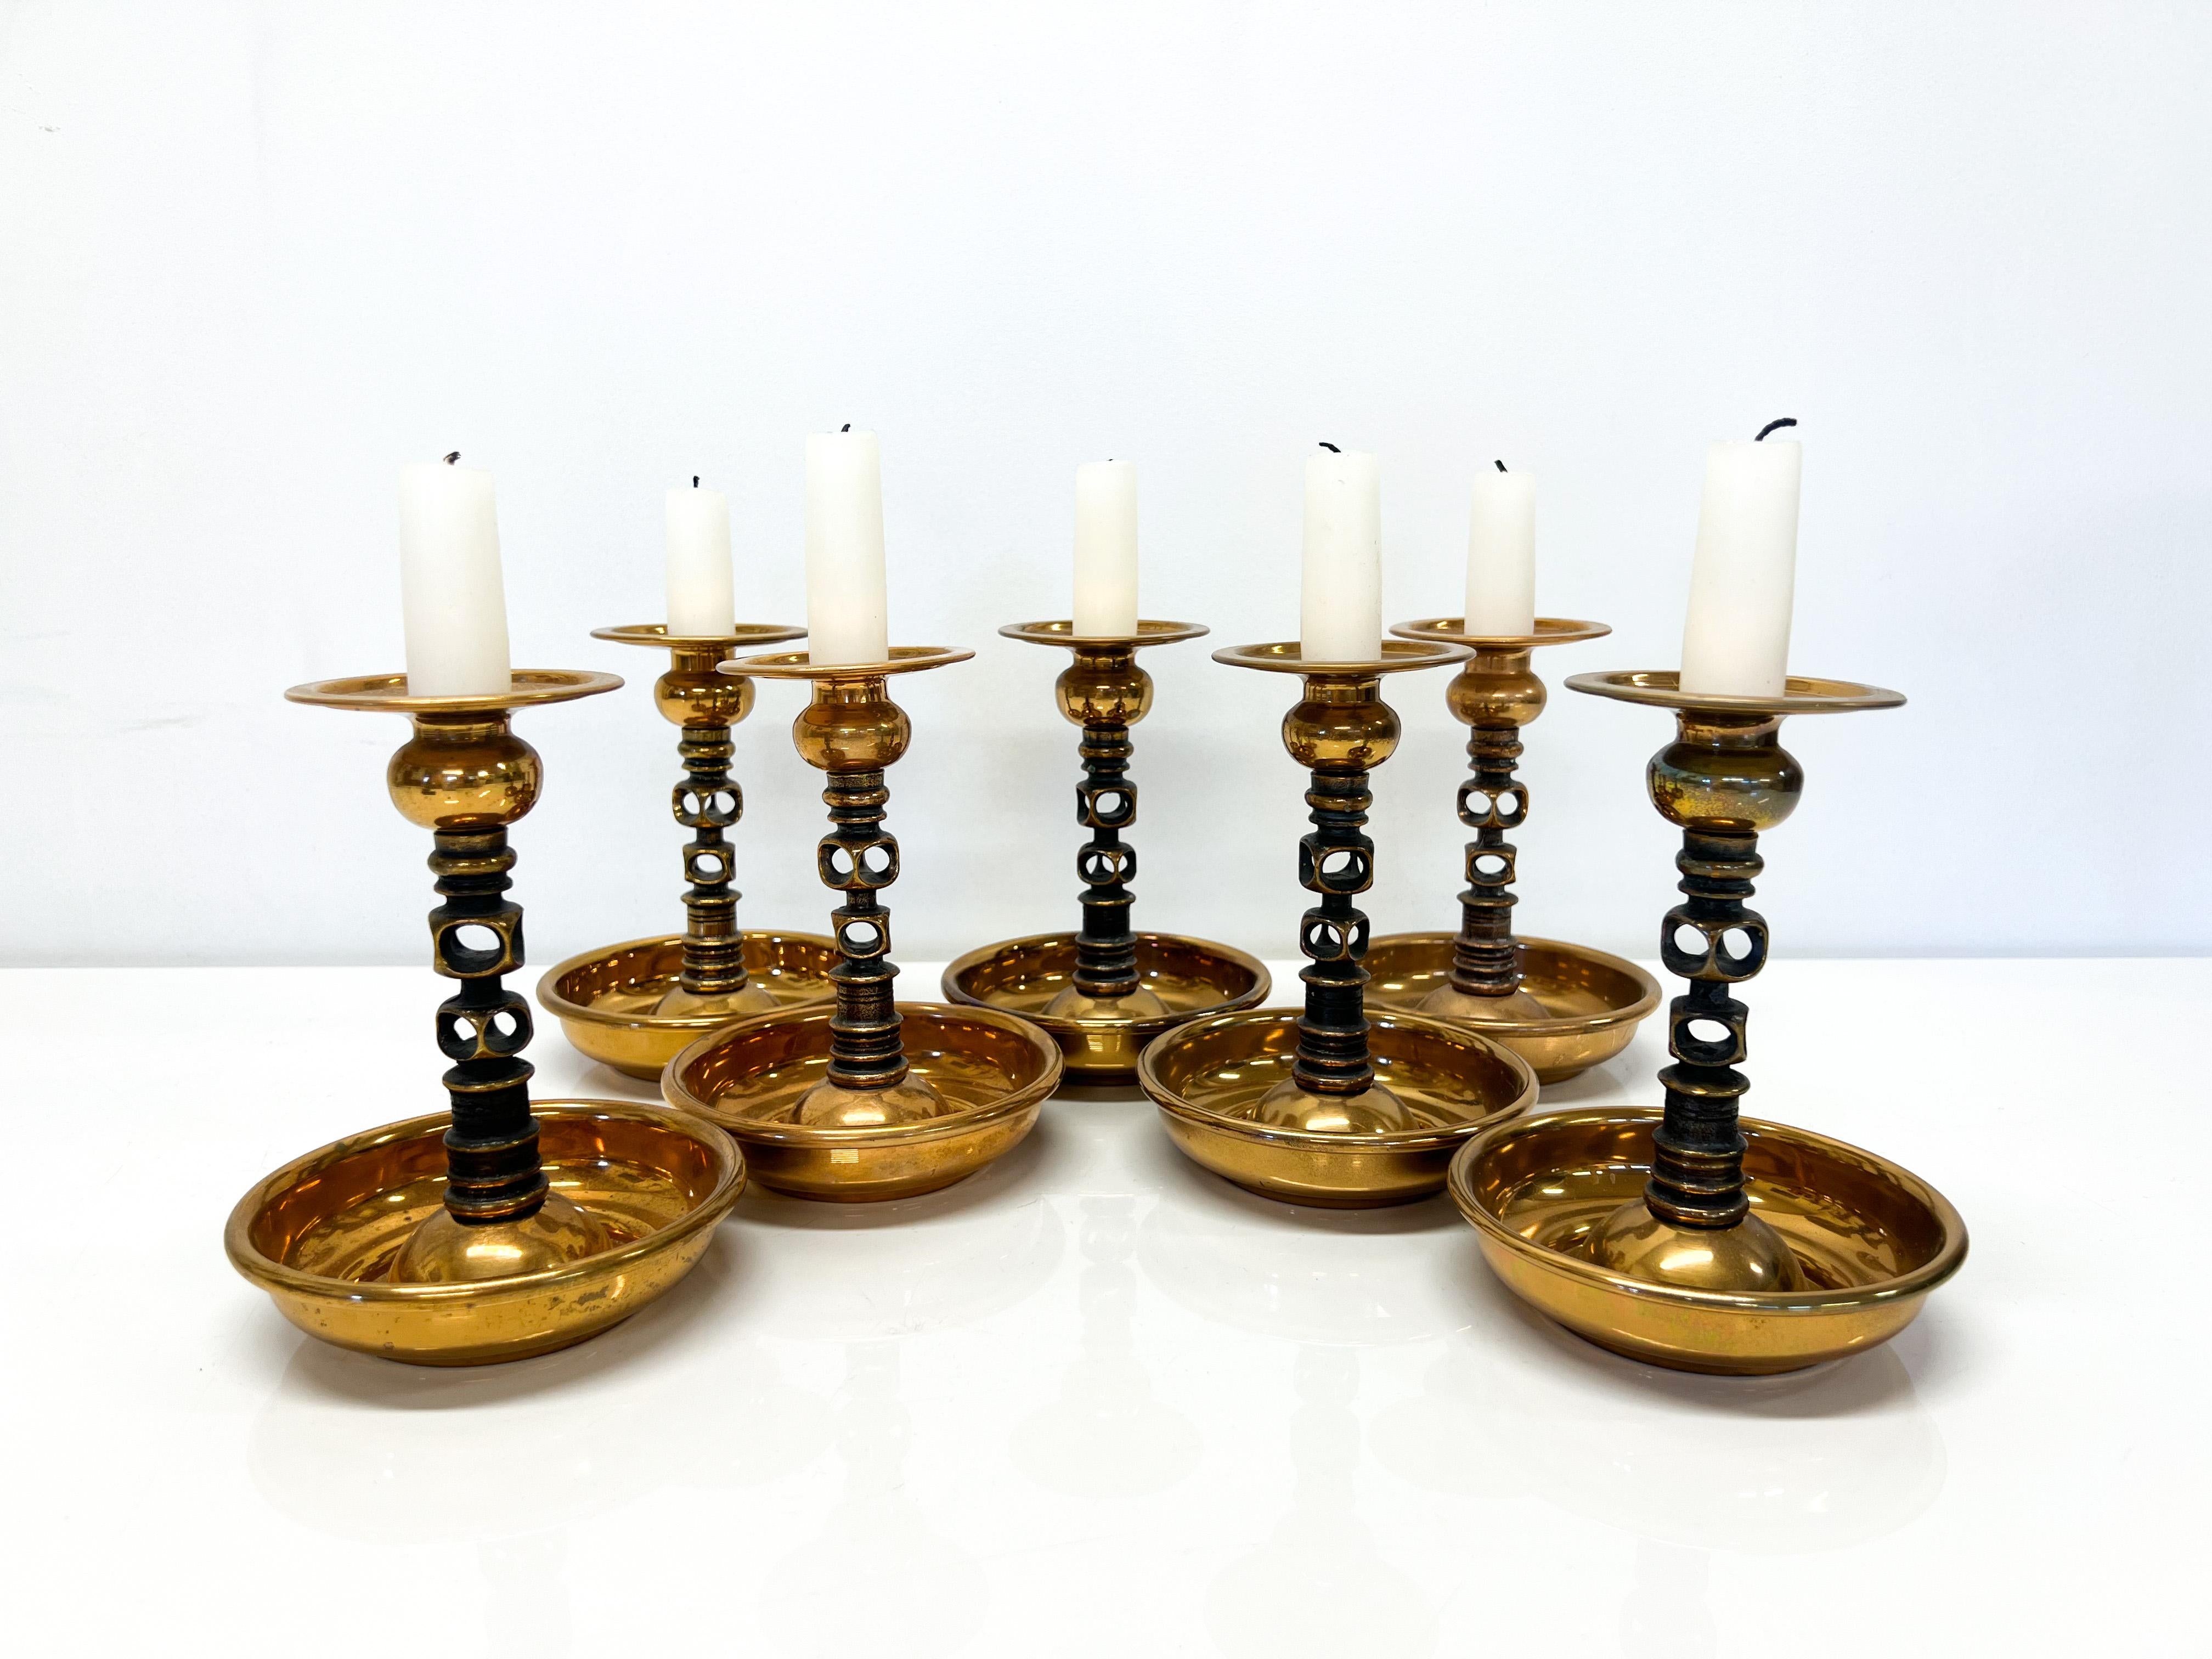 Abstract Candle holder Jorma Laine Turun Hopea Finland 7pcs.

Very special Candlesticks.
Hard to find these anywhere anymore.

Jorma Laine (1930-2002) was a Finnish jewelry designer, whose work in bronze and silver (more seldom gold) is easily